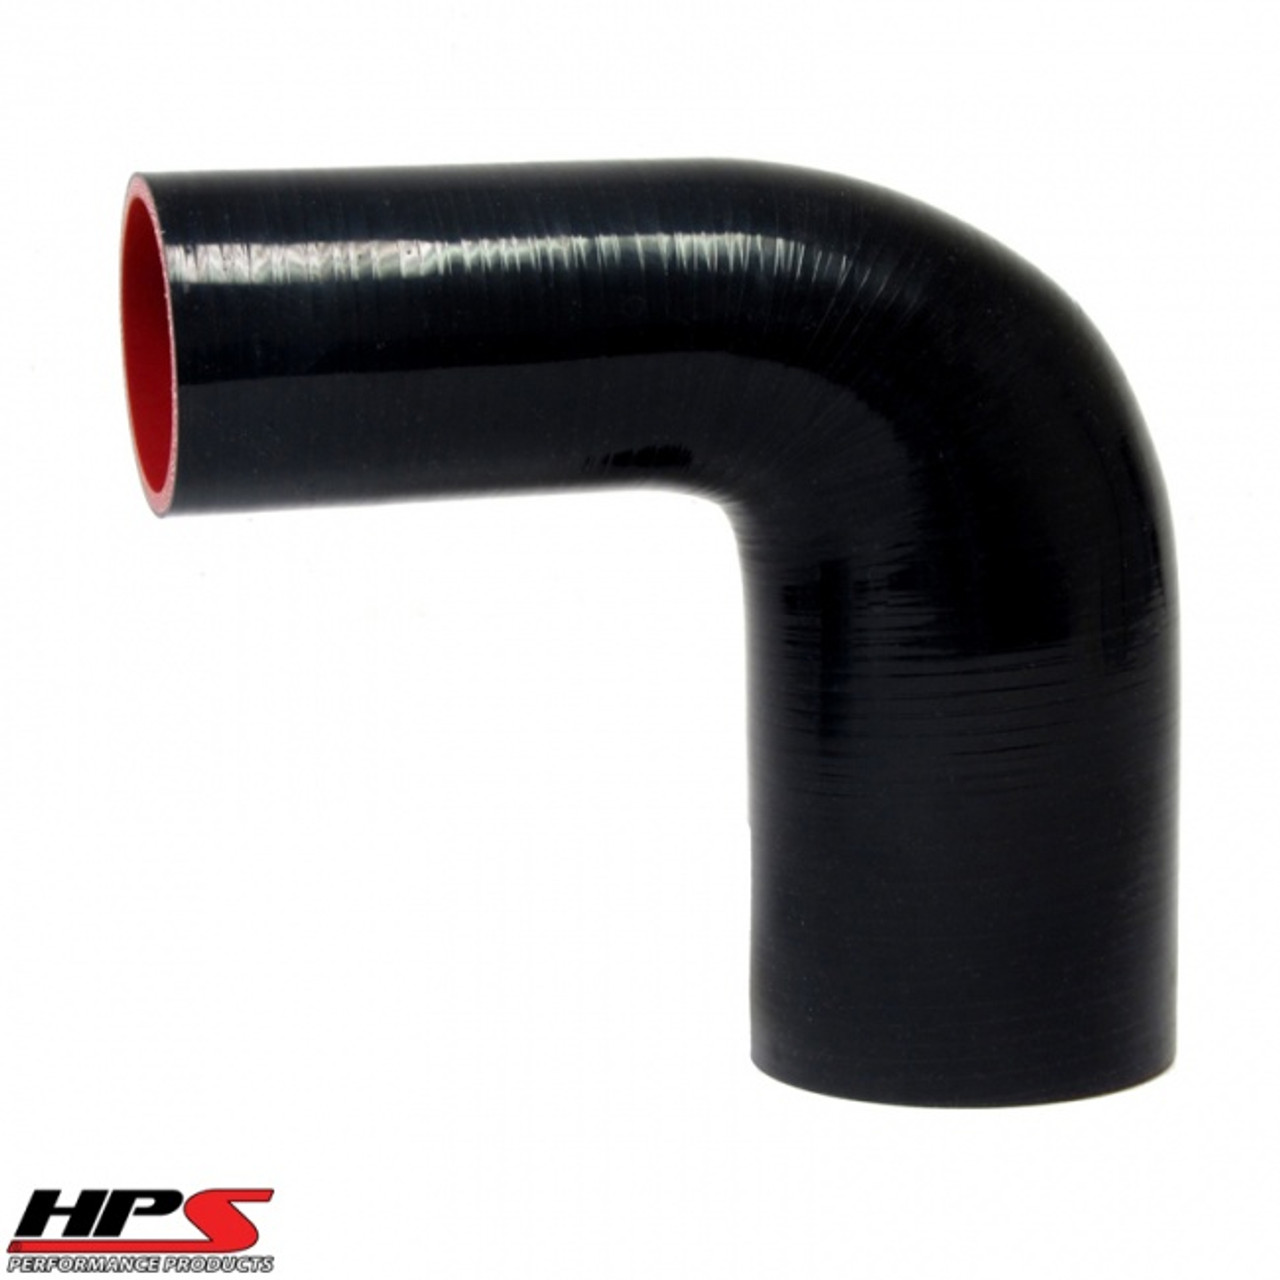 HPS 4 Ply Reinforced 90 Degree Silicone Hose Adapter 2.25 x 2.5